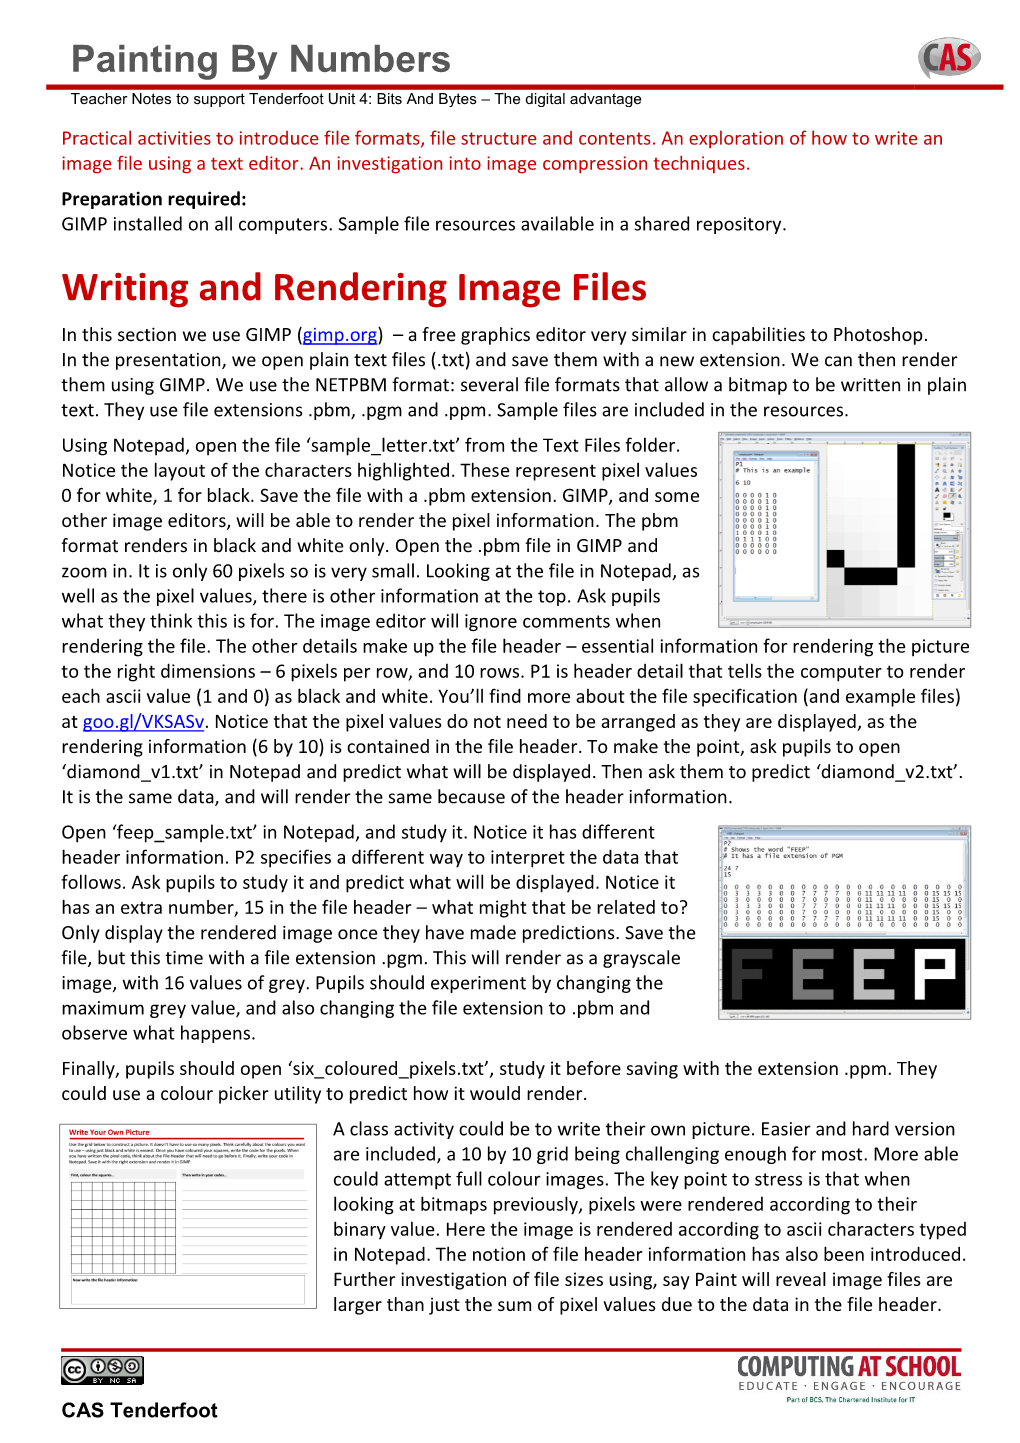 Writing and Rendering Image Files in This Section We Use GIMP (Gimp.Org) – a Free Graphics Editor Very Similar in Capabilities to Photoshop